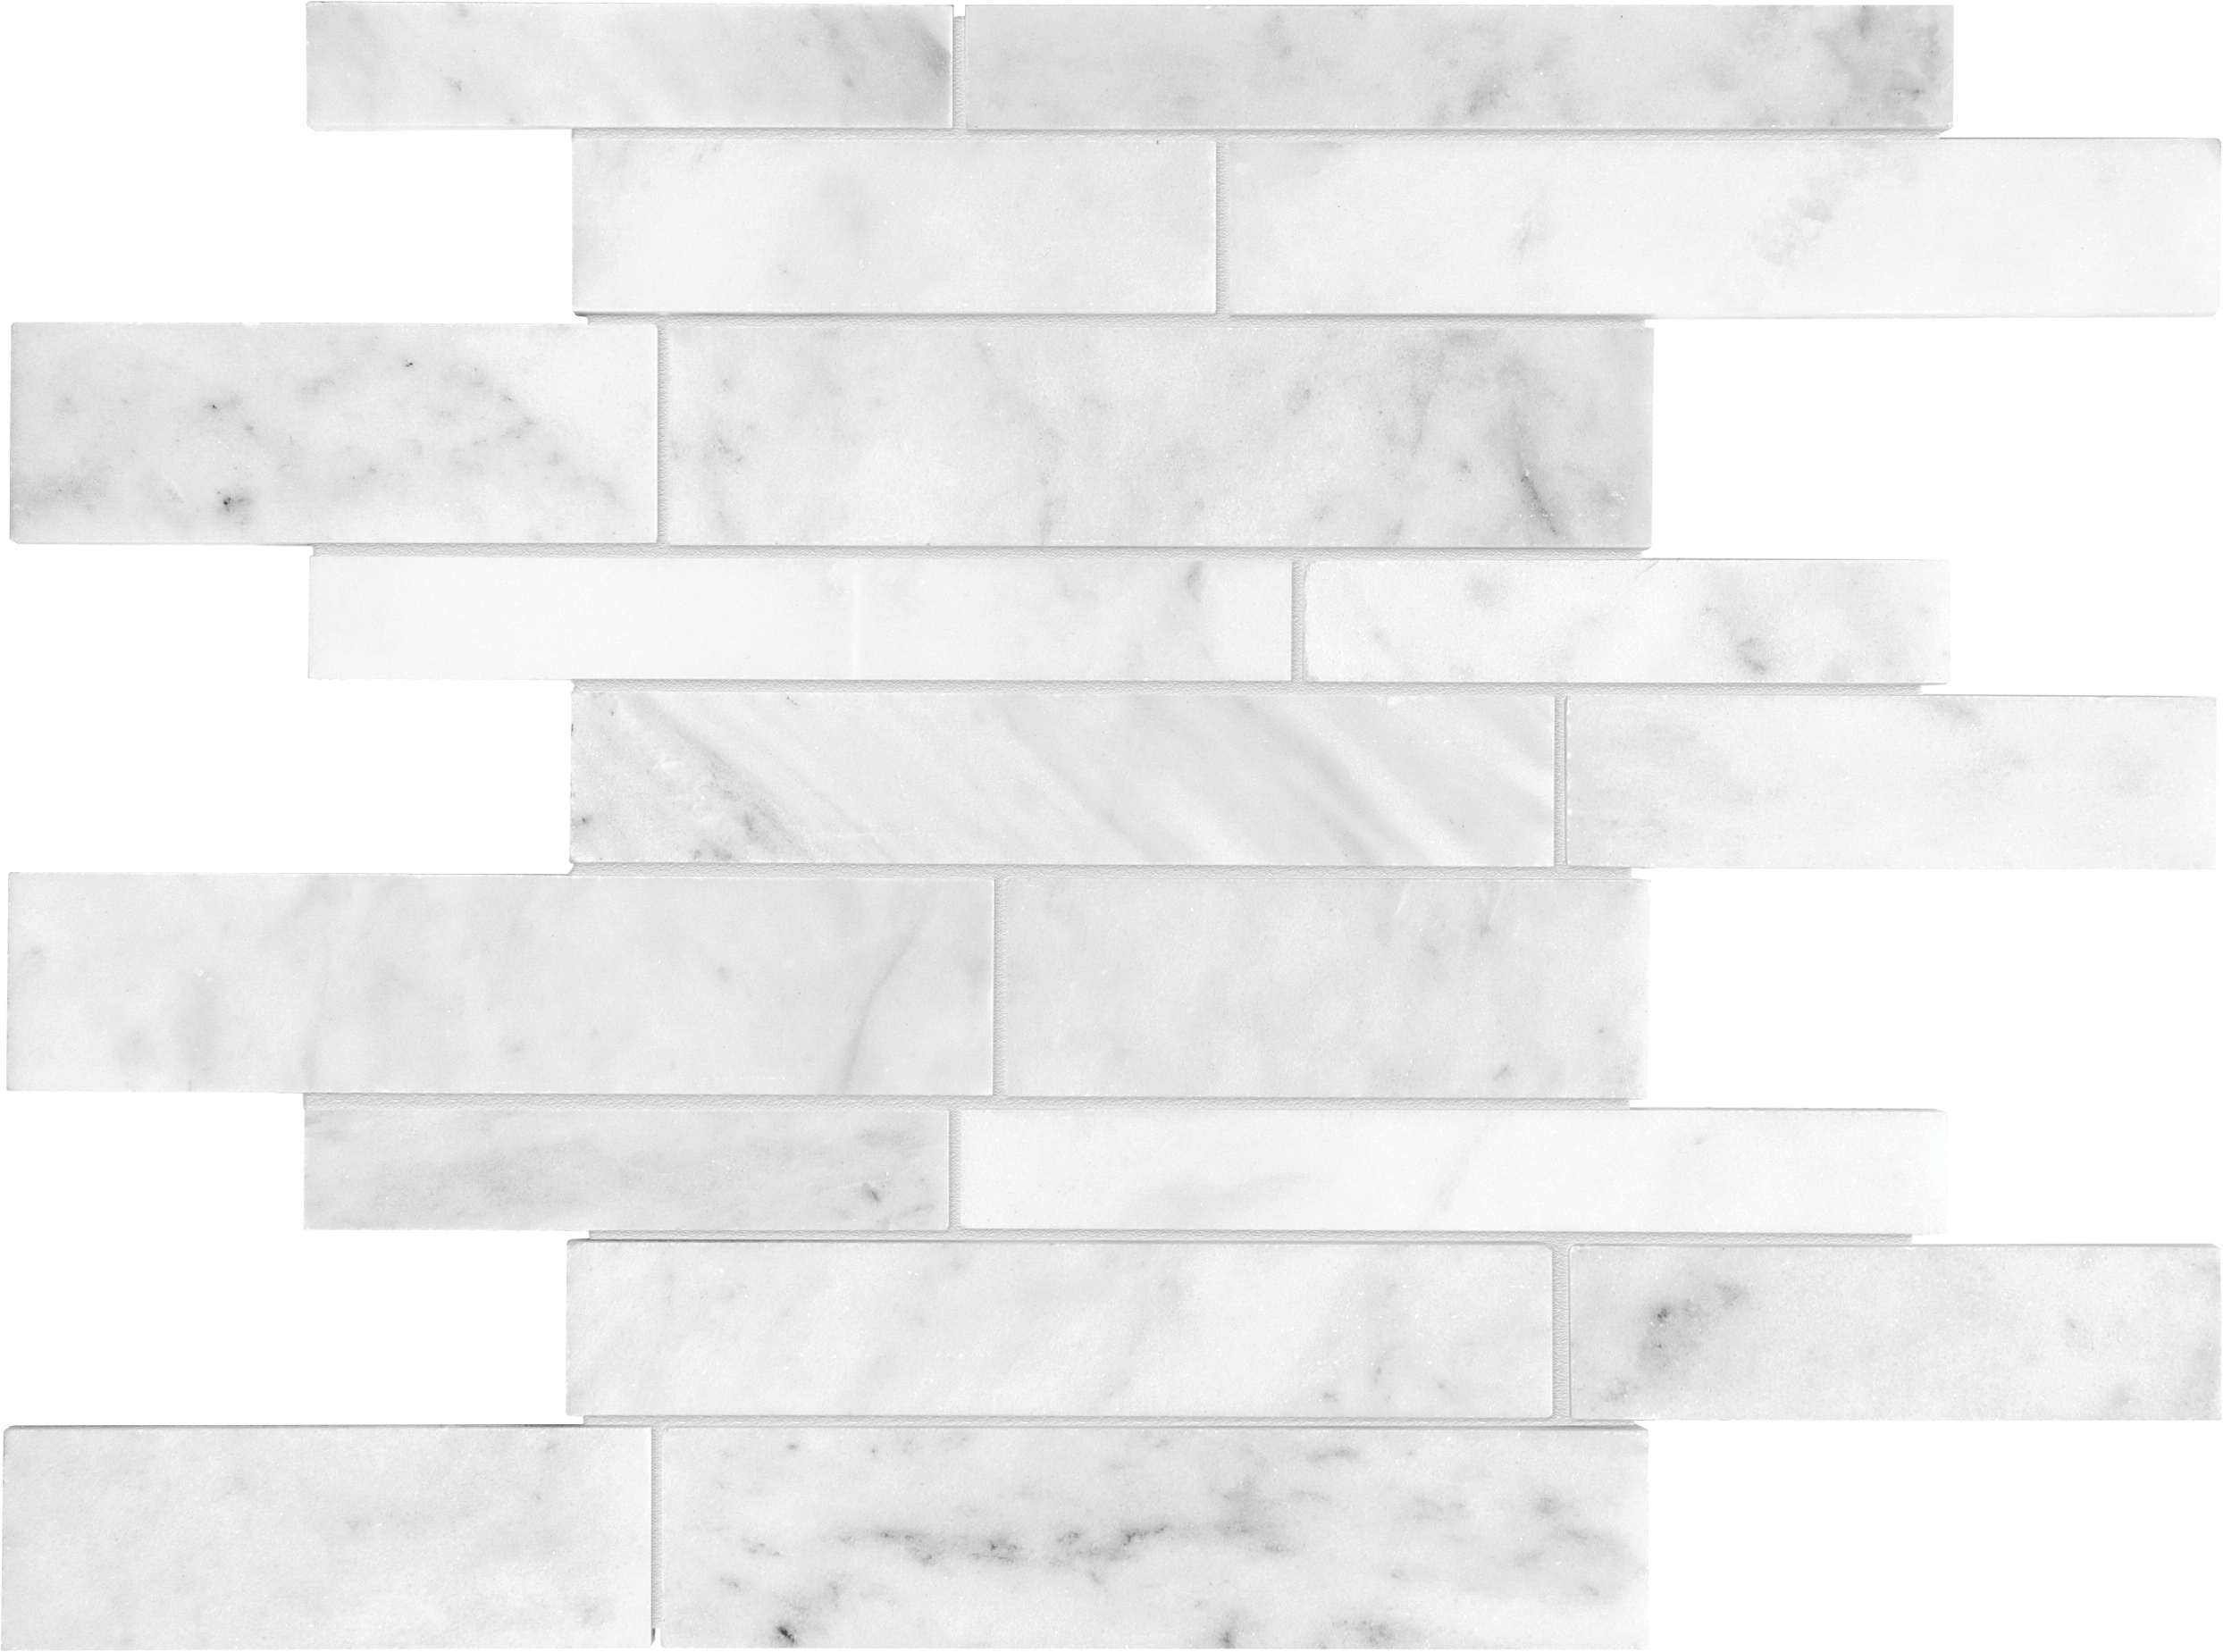 marble random strip pattern natural stone mosaic from bianco venatino anatolia collection distributed by surface group international polished finish straight edge edge mesh shape